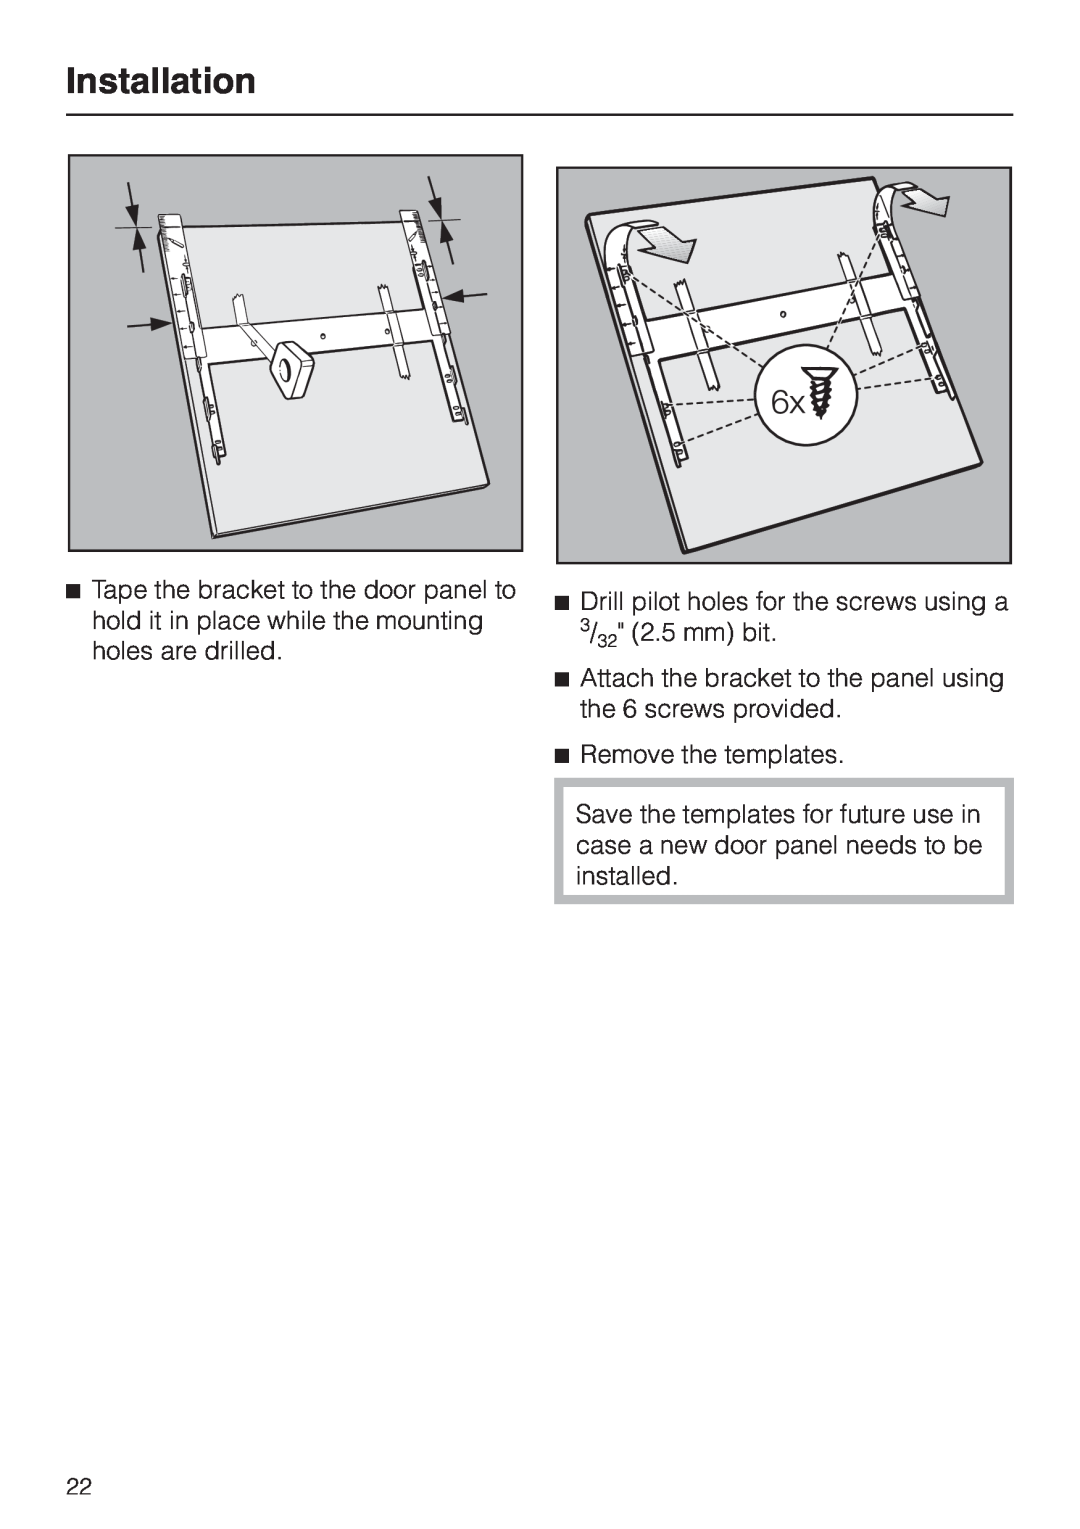 Miele HG02 installation instructions Installation, Remove the templates 